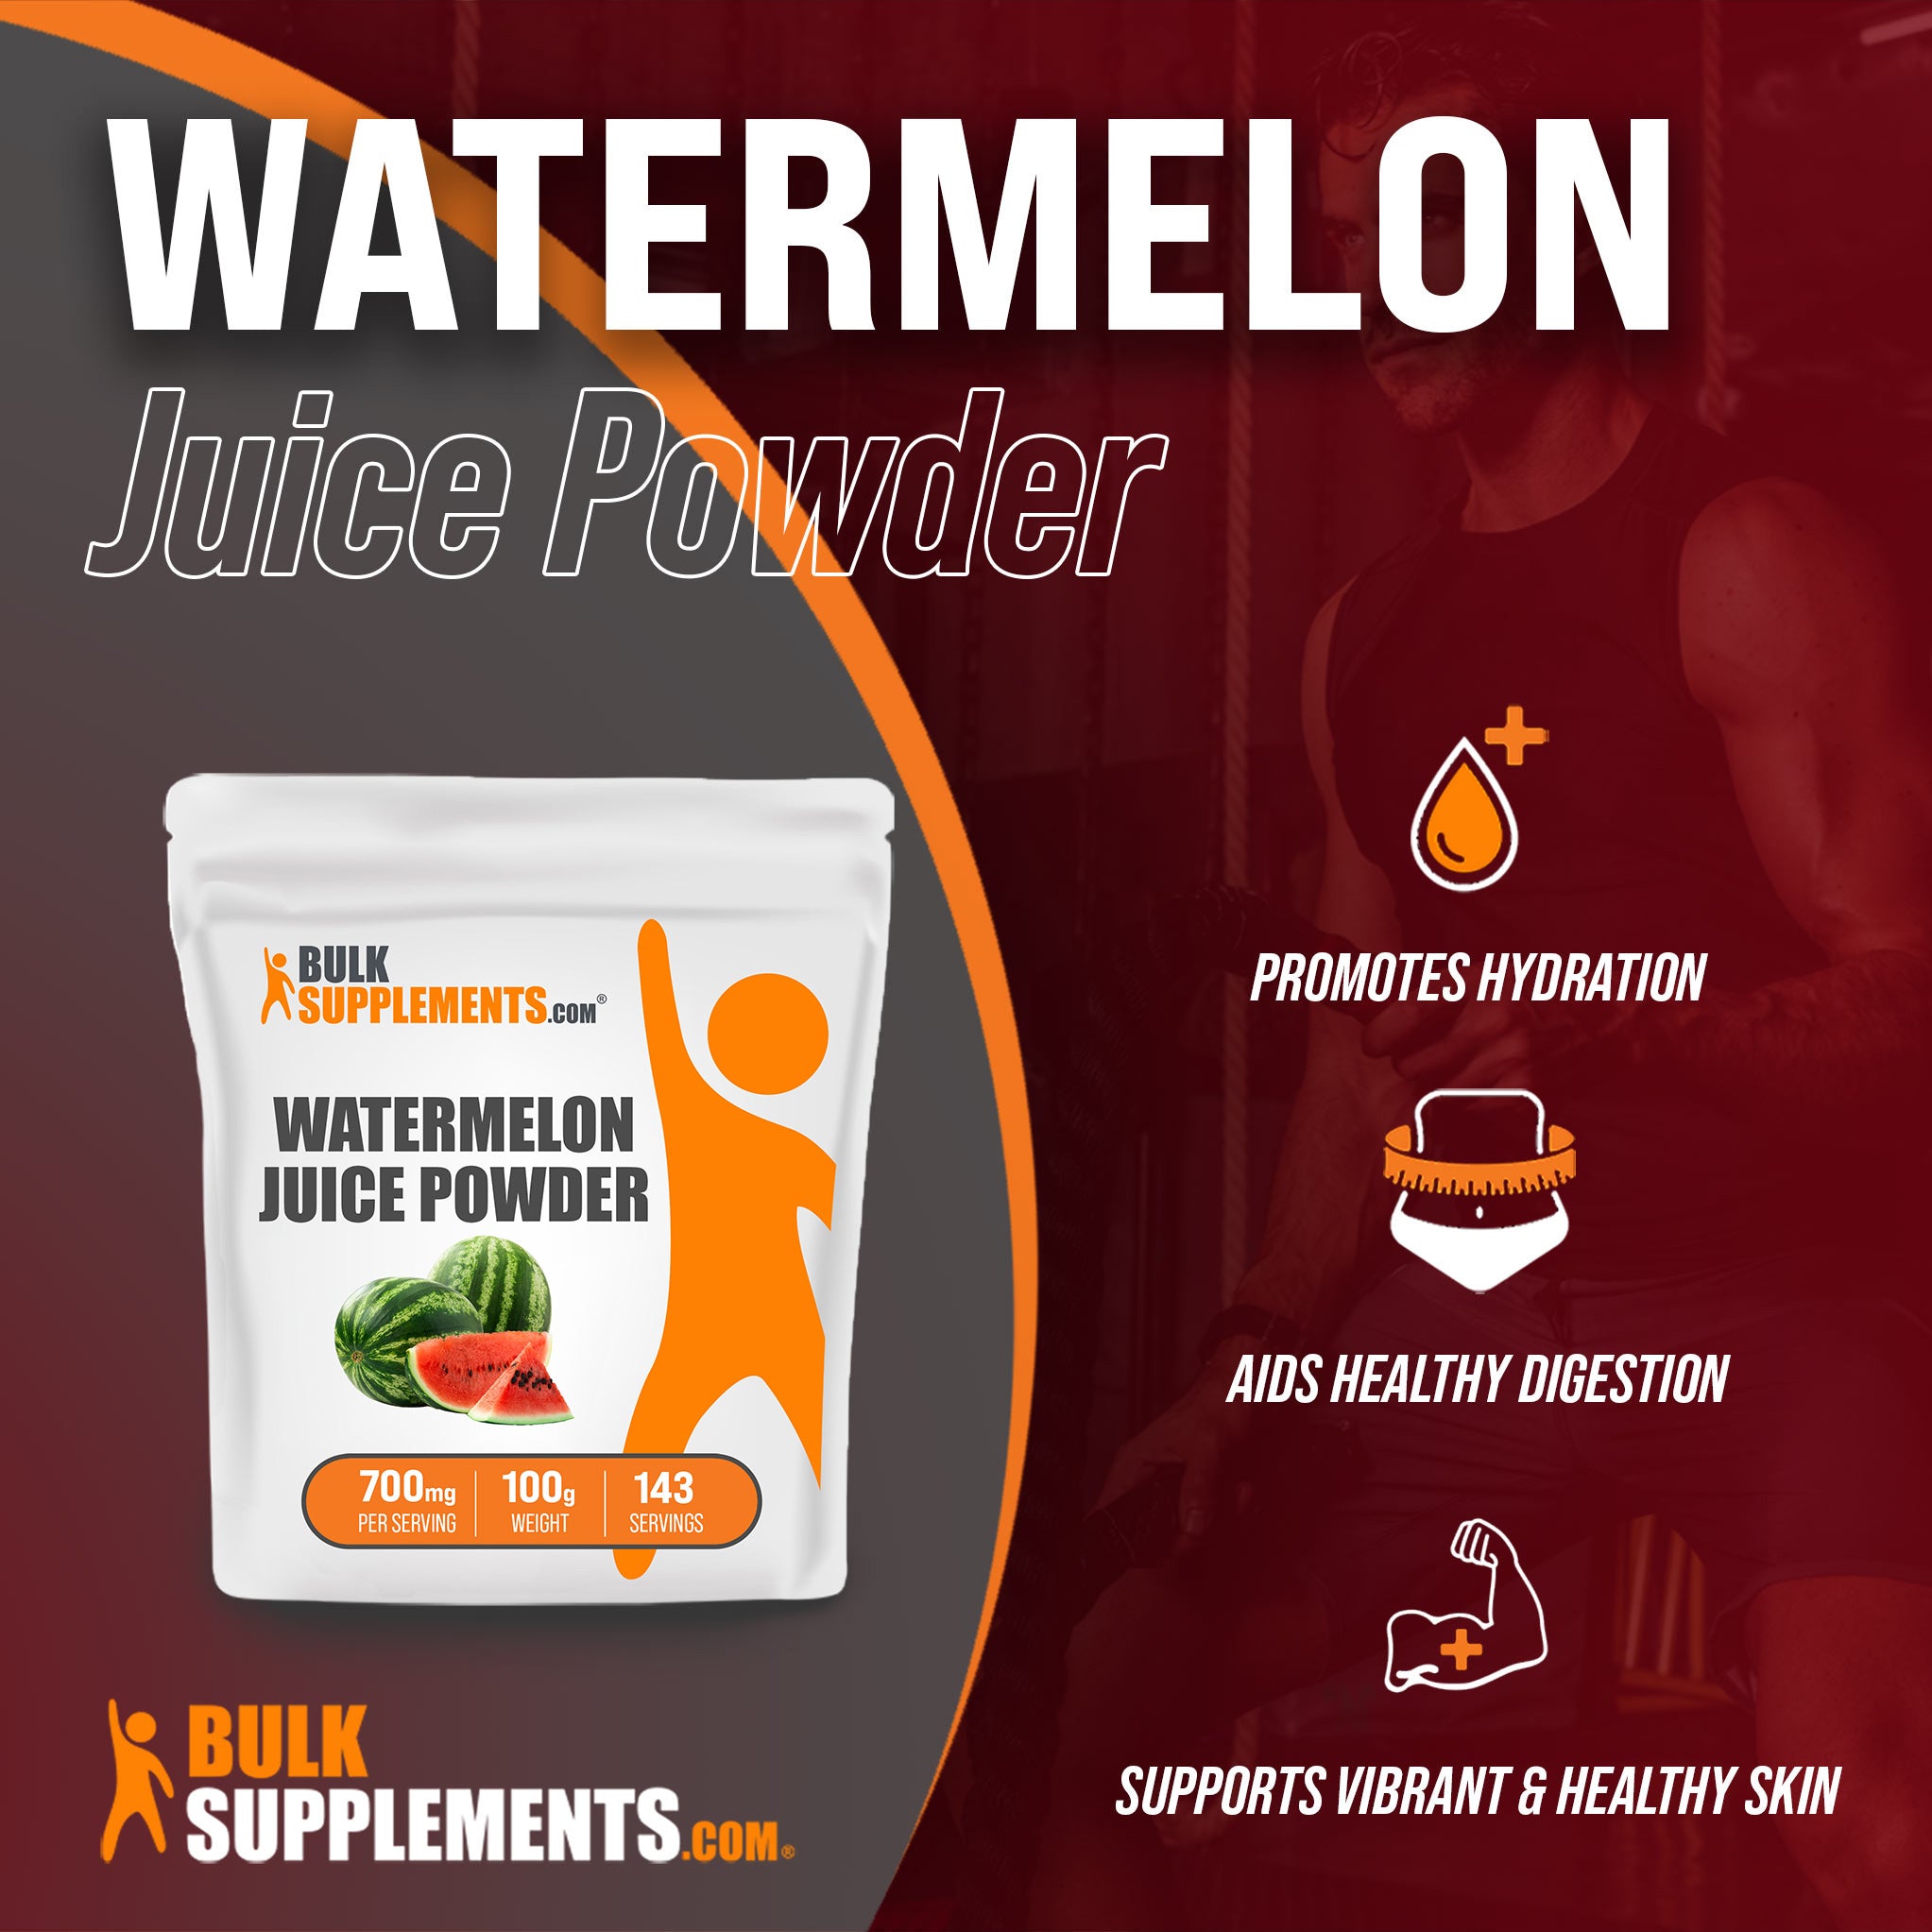 Benefits of Watermelon Juice Powder: promotes hydration, aids healthy digestion, supports vibrant and healthy skin